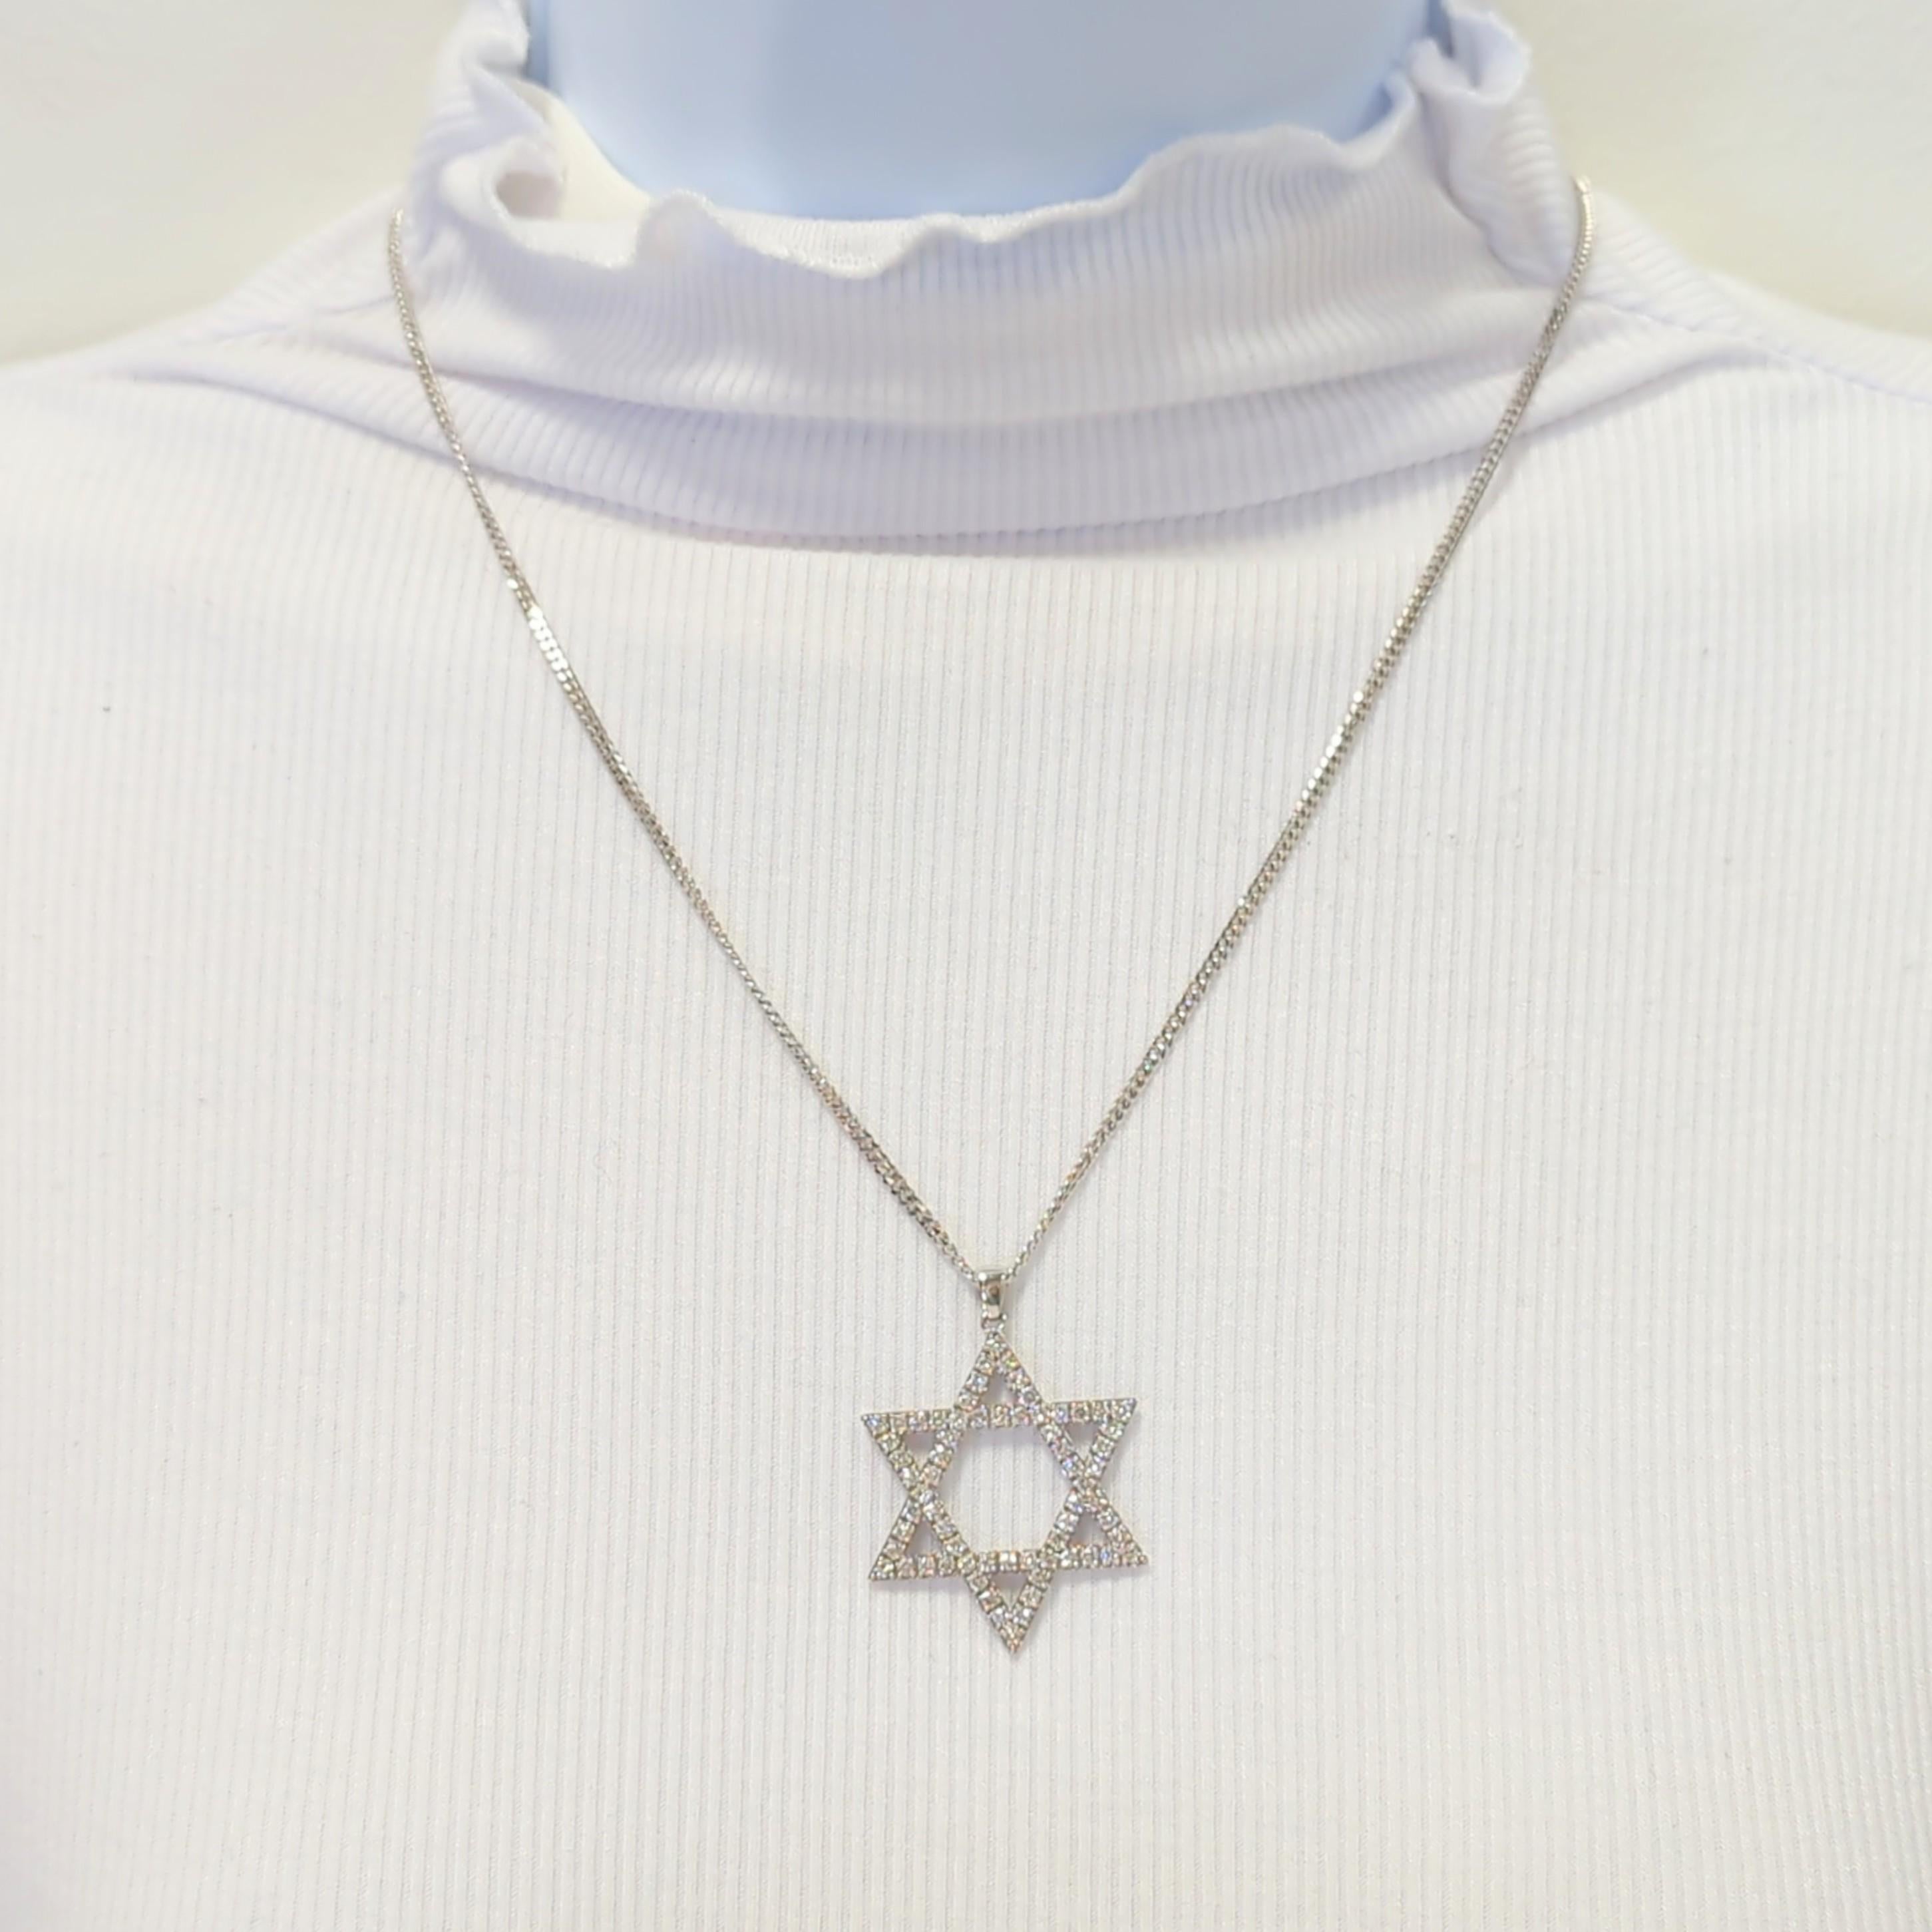 Beautiful Star of David pendant necklace with good quality white diamond rounds.  Handmade in 14k white gold.  Length is 20